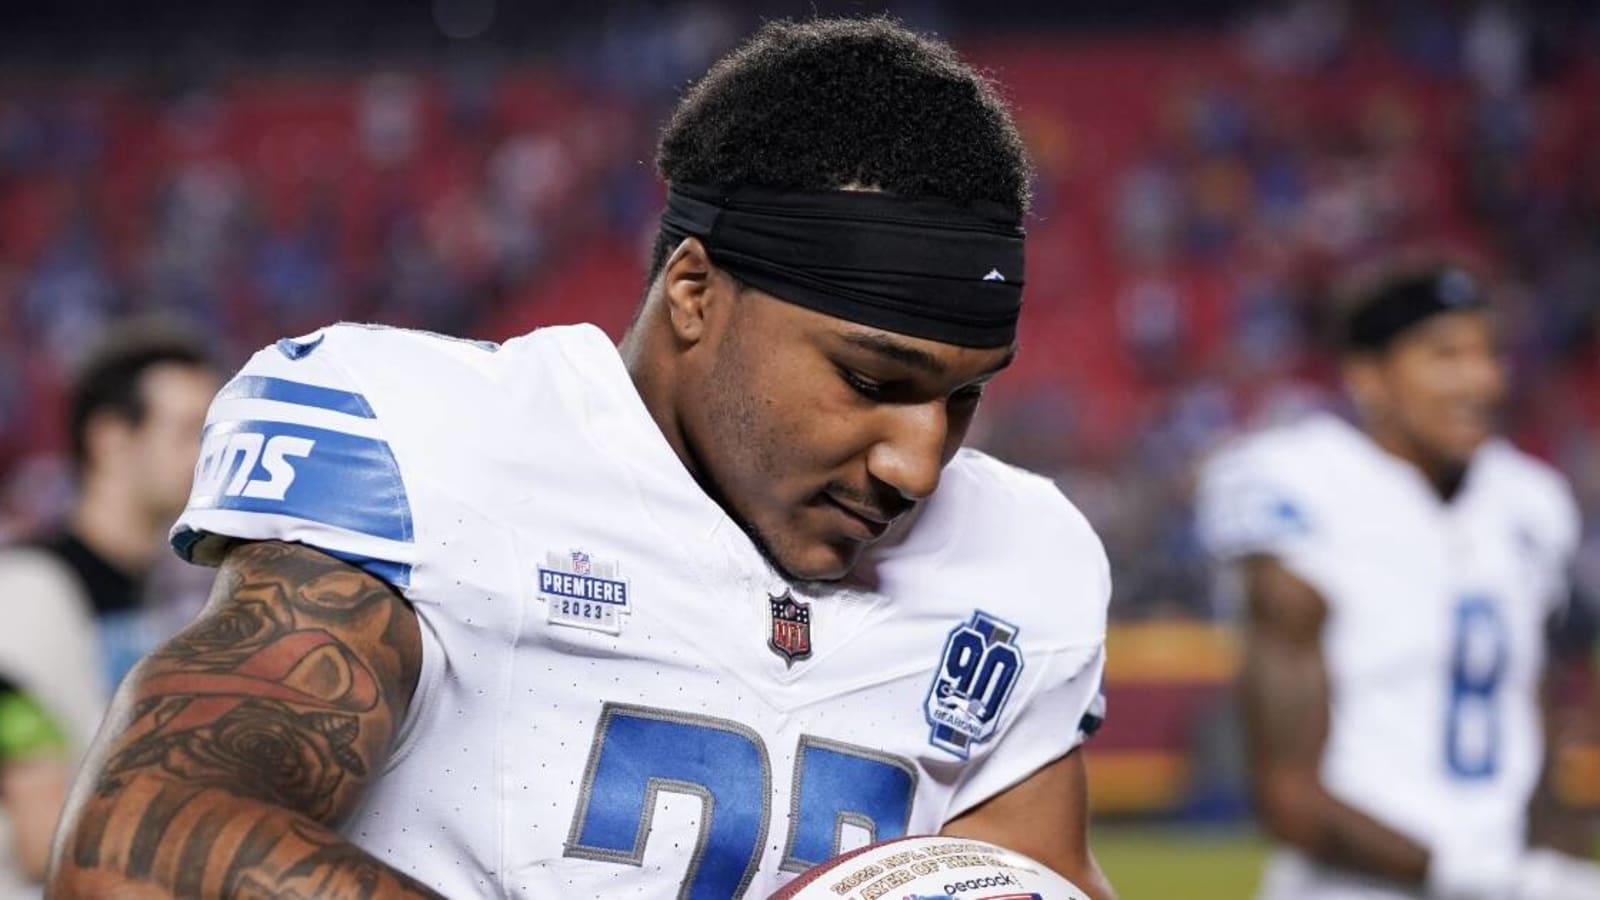 Lions safety Brian Branch carted off field after apparent ankle injury vs Packers